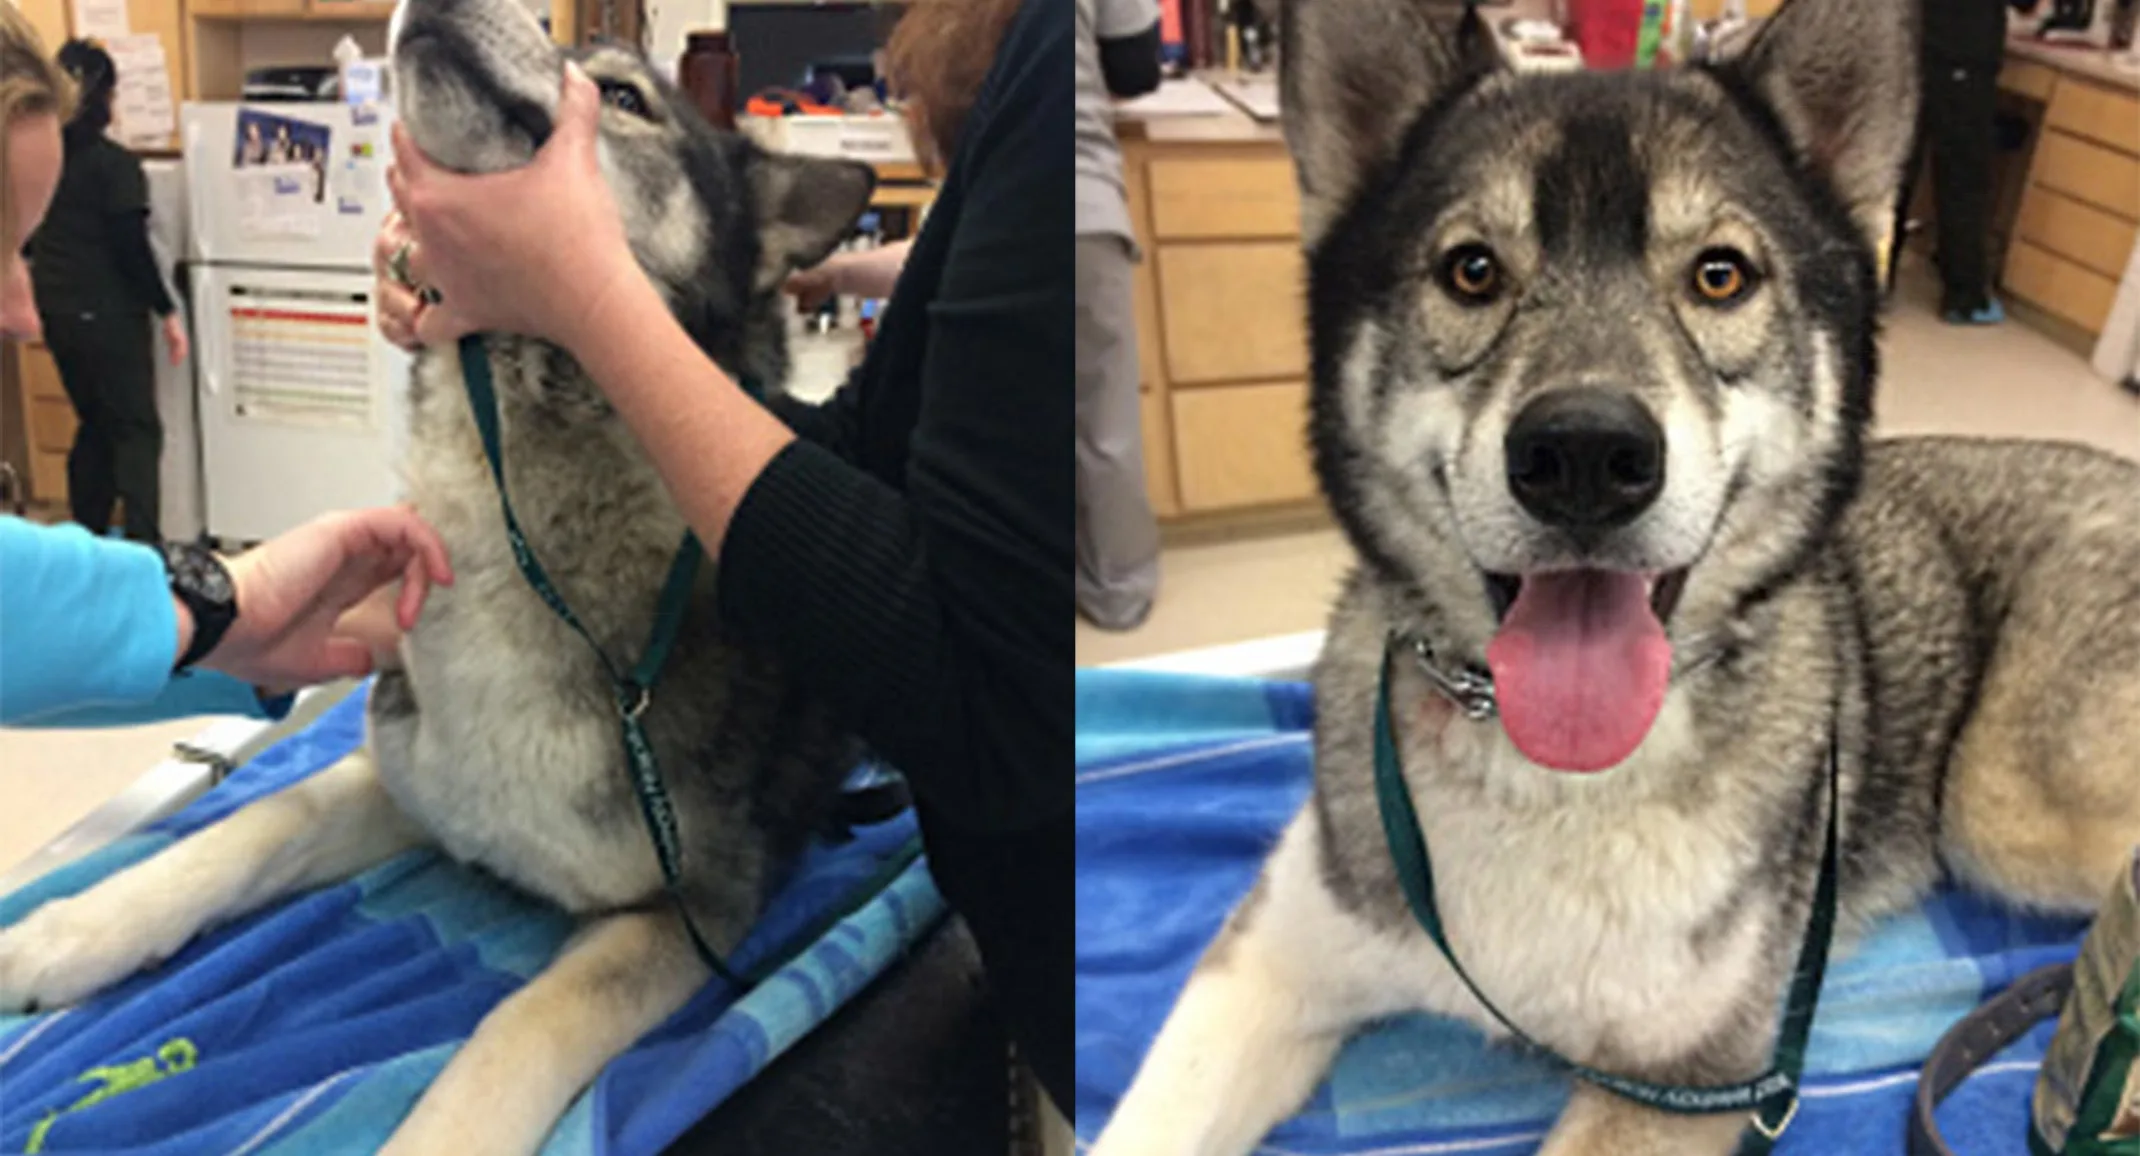 Timber the husky donating blood at Brentwood Veterinary Hospital